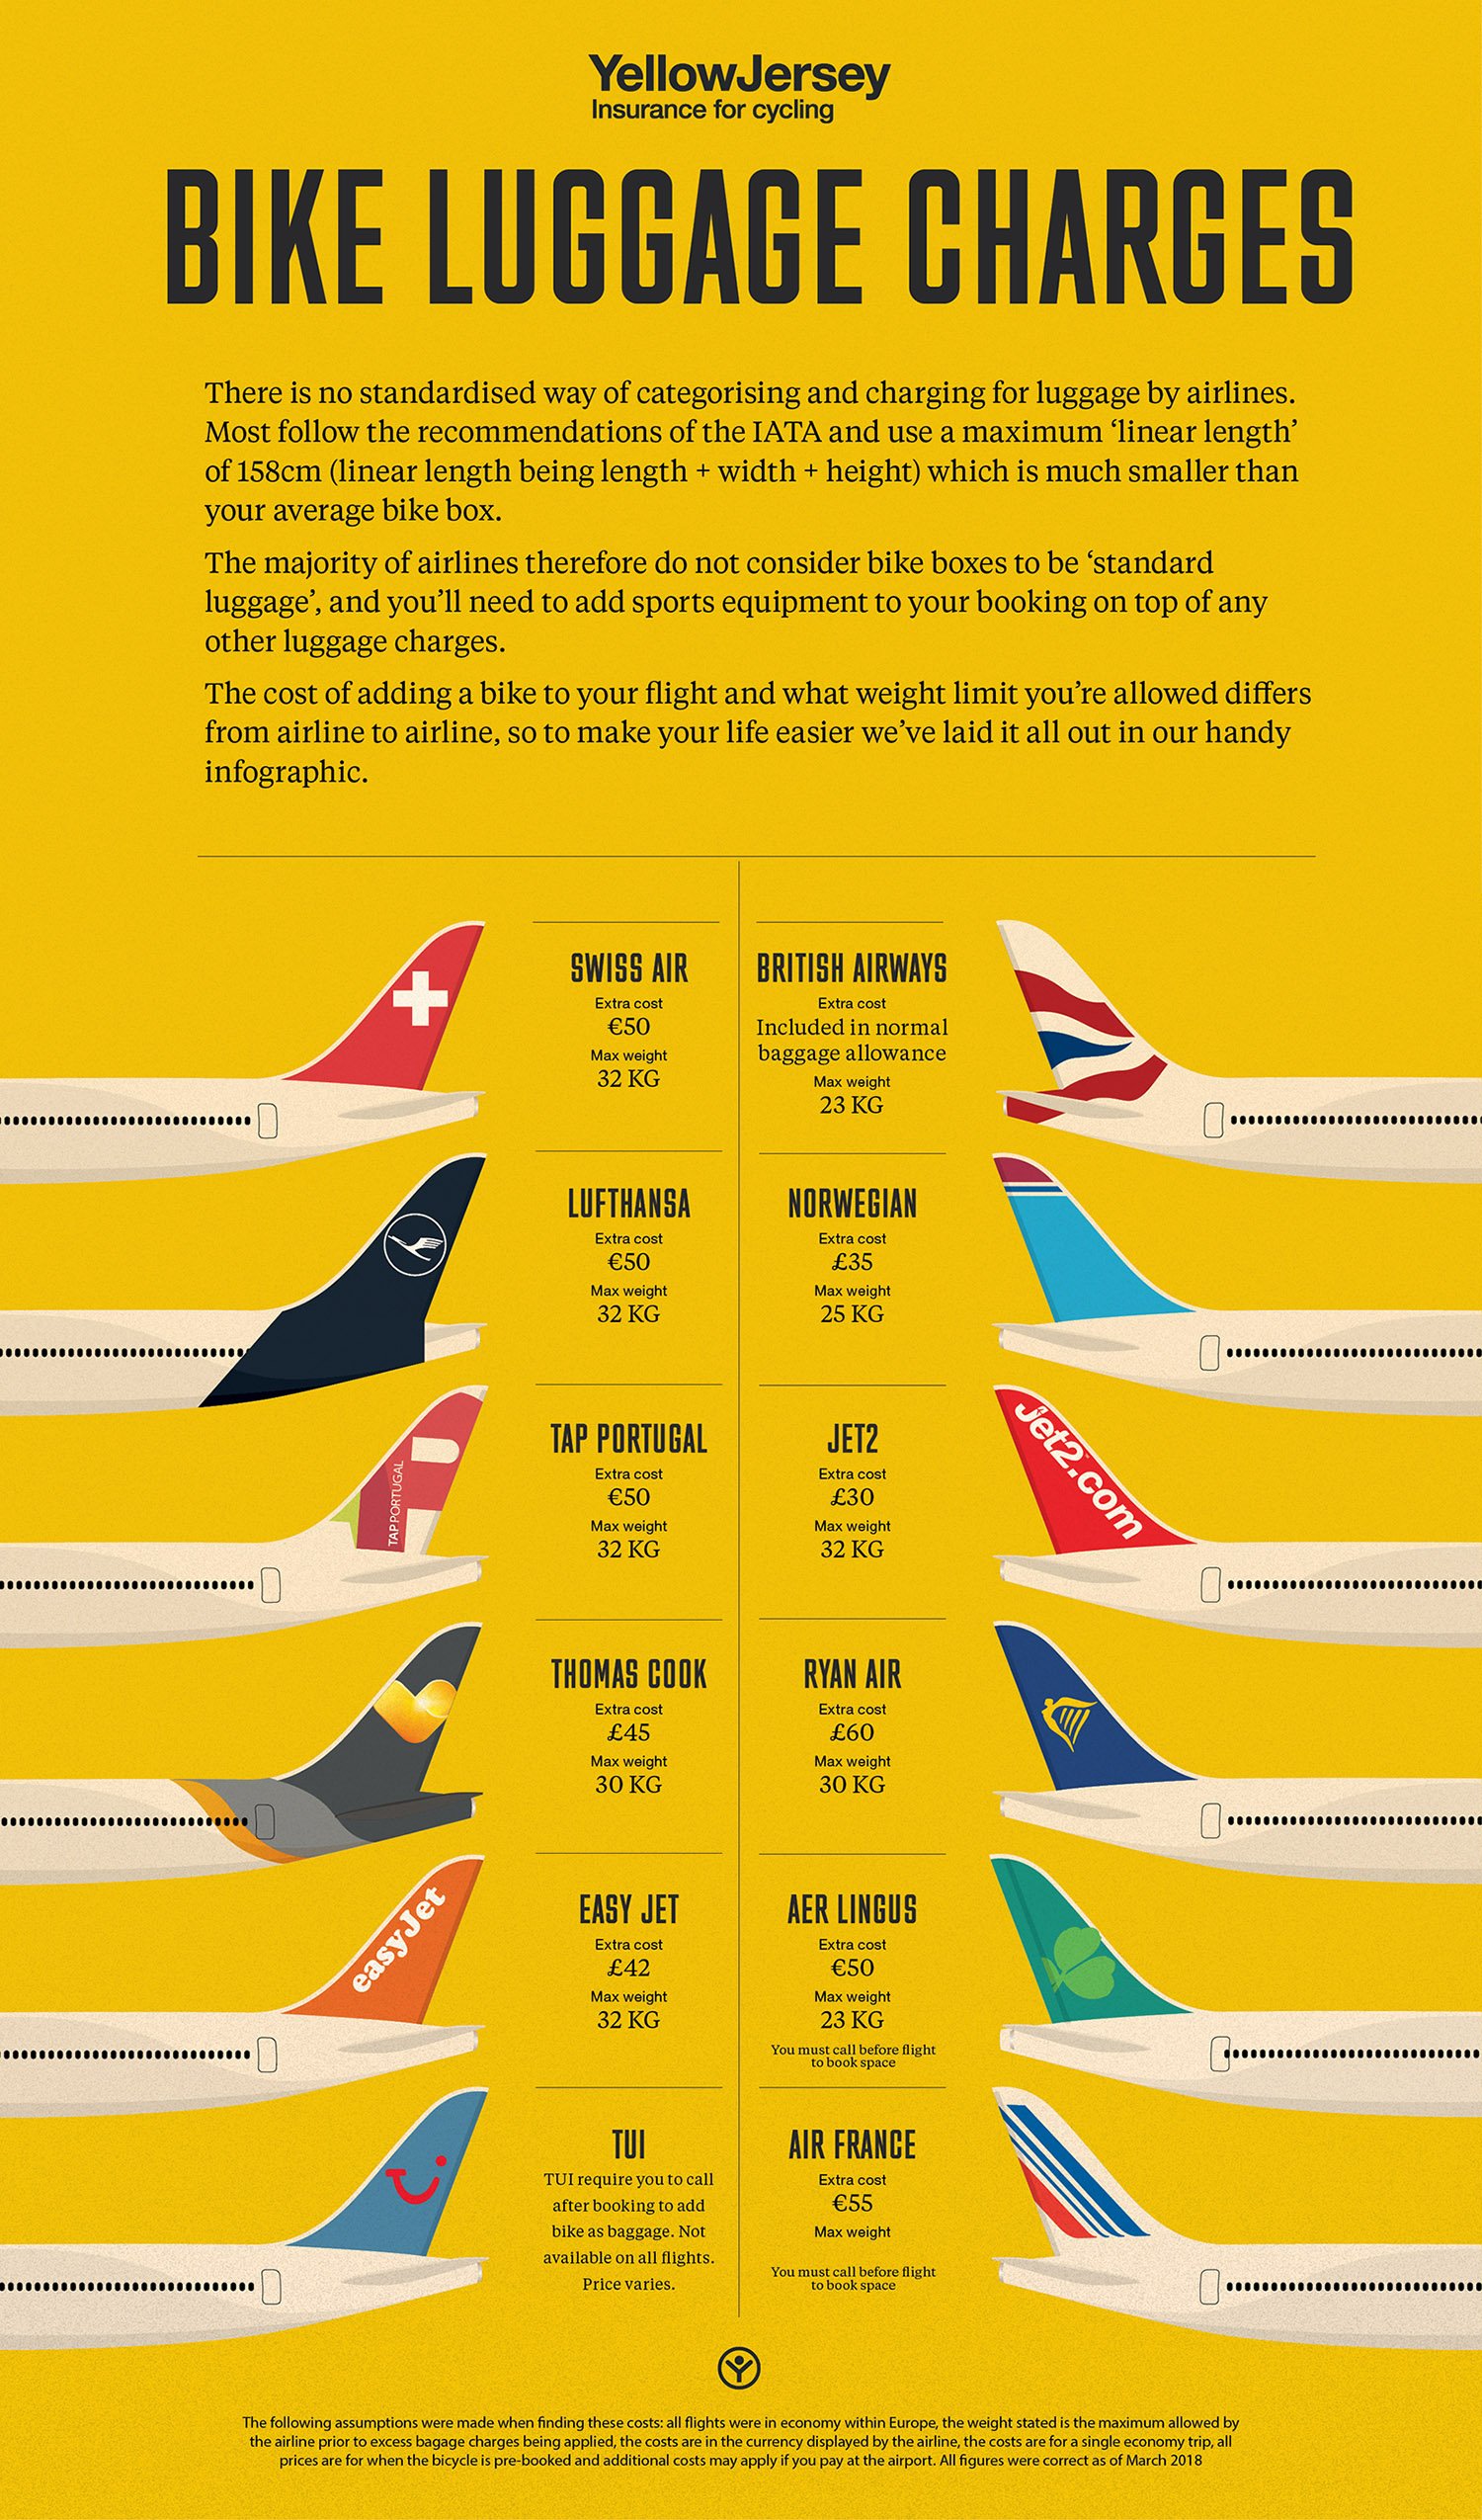 bike luggage charges for air travel infographic yellow jersey cycle insurance